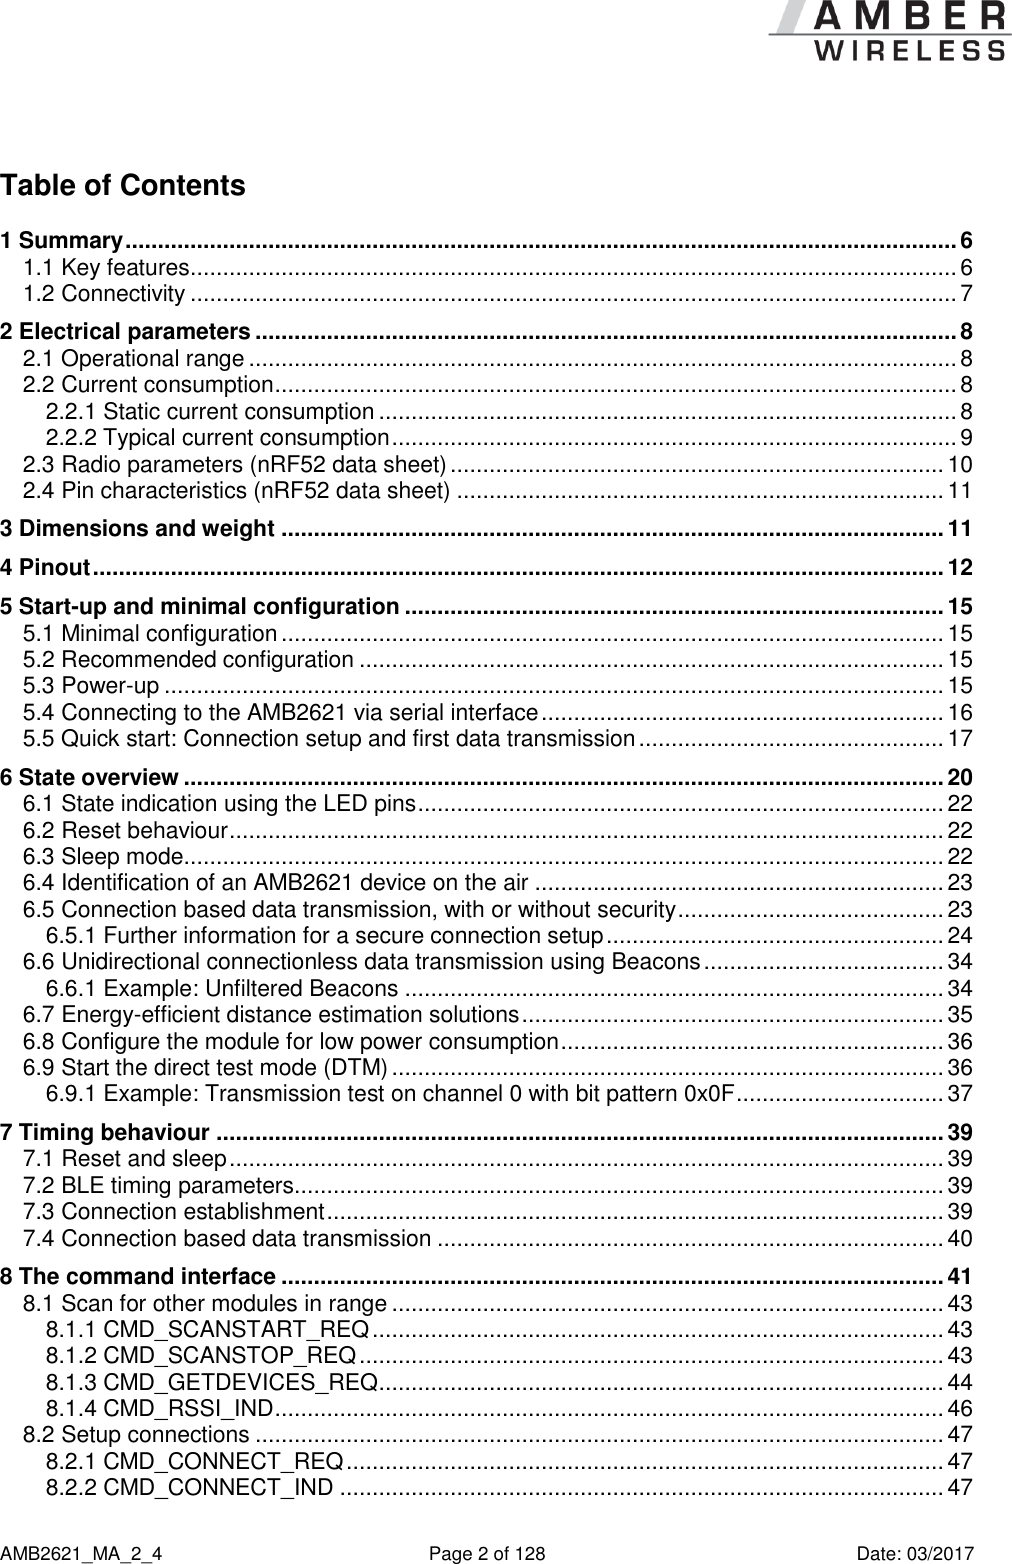      AMB2621_MA_2_4  Page 2 of 128  Date: 03/2017 Table of Contents 1 Summary ................................................................................................................................ 6 1.1 Key features ...................................................................................................................... 6 1.2 Connectivity ...................................................................................................................... 7 2 Electrical parameters ............................................................................................................ 8 2.1 Operational range ............................................................................................................. 8 2.2 Current consumption ......................................................................................................... 8 2.2.1 Static current consumption ......................................................................................... 8 2.2.2 Typical current consumption ....................................................................................... 9 2.3 Radio parameters (nRF52 data sheet) ............................................................................ 10 2.4 Pin characteristics (nRF52 data sheet) ........................................................................... 11 3 Dimensions and weight ...................................................................................................... 11 4 Pinout ................................................................................................................................... 12 5 Start-up and minimal configuration ................................................................................... 15 5.1 Minimal configuration ...................................................................................................... 15 5.2 Recommended configuration .......................................................................................... 15 5.3 Power-up ........................................................................................................................ 15 5.4 Connecting to the AMB2621 via serial interface .............................................................. 16 5.5 Quick start: Connection setup and first data transmission ............................................... 17 6 State overview ..................................................................................................................... 20 6.1 State indication using the LED pins ................................................................................. 22 6.2 Reset behaviour .............................................................................................................. 22 6.3 Sleep mode ..................................................................................................................... 22 6.4 Identification of an AMB2621 device on the air ............................................................... 23 6.5 Connection based data transmission, with or without security ......................................... 23 6.5.1 Further information for a secure connection setup .................................................... 24 6.6 Unidirectional connectionless data transmission using Beacons ..................................... 34 6.6.1 Example: Unfiltered Beacons ................................................................................... 34 6.7 Energy-efficient distance estimation solutions ................................................................. 35 6.8 Configure the module for low power consumption ........................................................... 36 6.9 Start the direct test mode (DTM) ..................................................................................... 36 6.9.1 Example: Transmission test on channel 0 with bit pattern 0x0F ................................ 37 7 Timing behaviour ................................................................................................................ 39 7.1 Reset and sleep .............................................................................................................. 39 7.2 BLE timing parameters.................................................................................................... 39 7.3 Connection establishment ............................................................................................... 39 7.4 Connection based data transmission .............................................................................. 40 8 The command interface ...................................................................................................... 41 8.1 Scan for other modules in range ..................................................................................... 43 8.1.1 CMD_SCANSTART_REQ ........................................................................................ 43 8.1.2 CMD_SCANSTOP_REQ .......................................................................................... 43 8.1.3 CMD_GETDEVICES_REQ ....................................................................................... 44 8.1.4 CMD_RSSI_IND ....................................................................................................... 46 8.2 Setup connections .......................................................................................................... 47 8.2.1 CMD_CONNECT_REQ ............................................................................................ 47 8.2.2 CMD_CONNECT_IND ............................................................................................. 47 